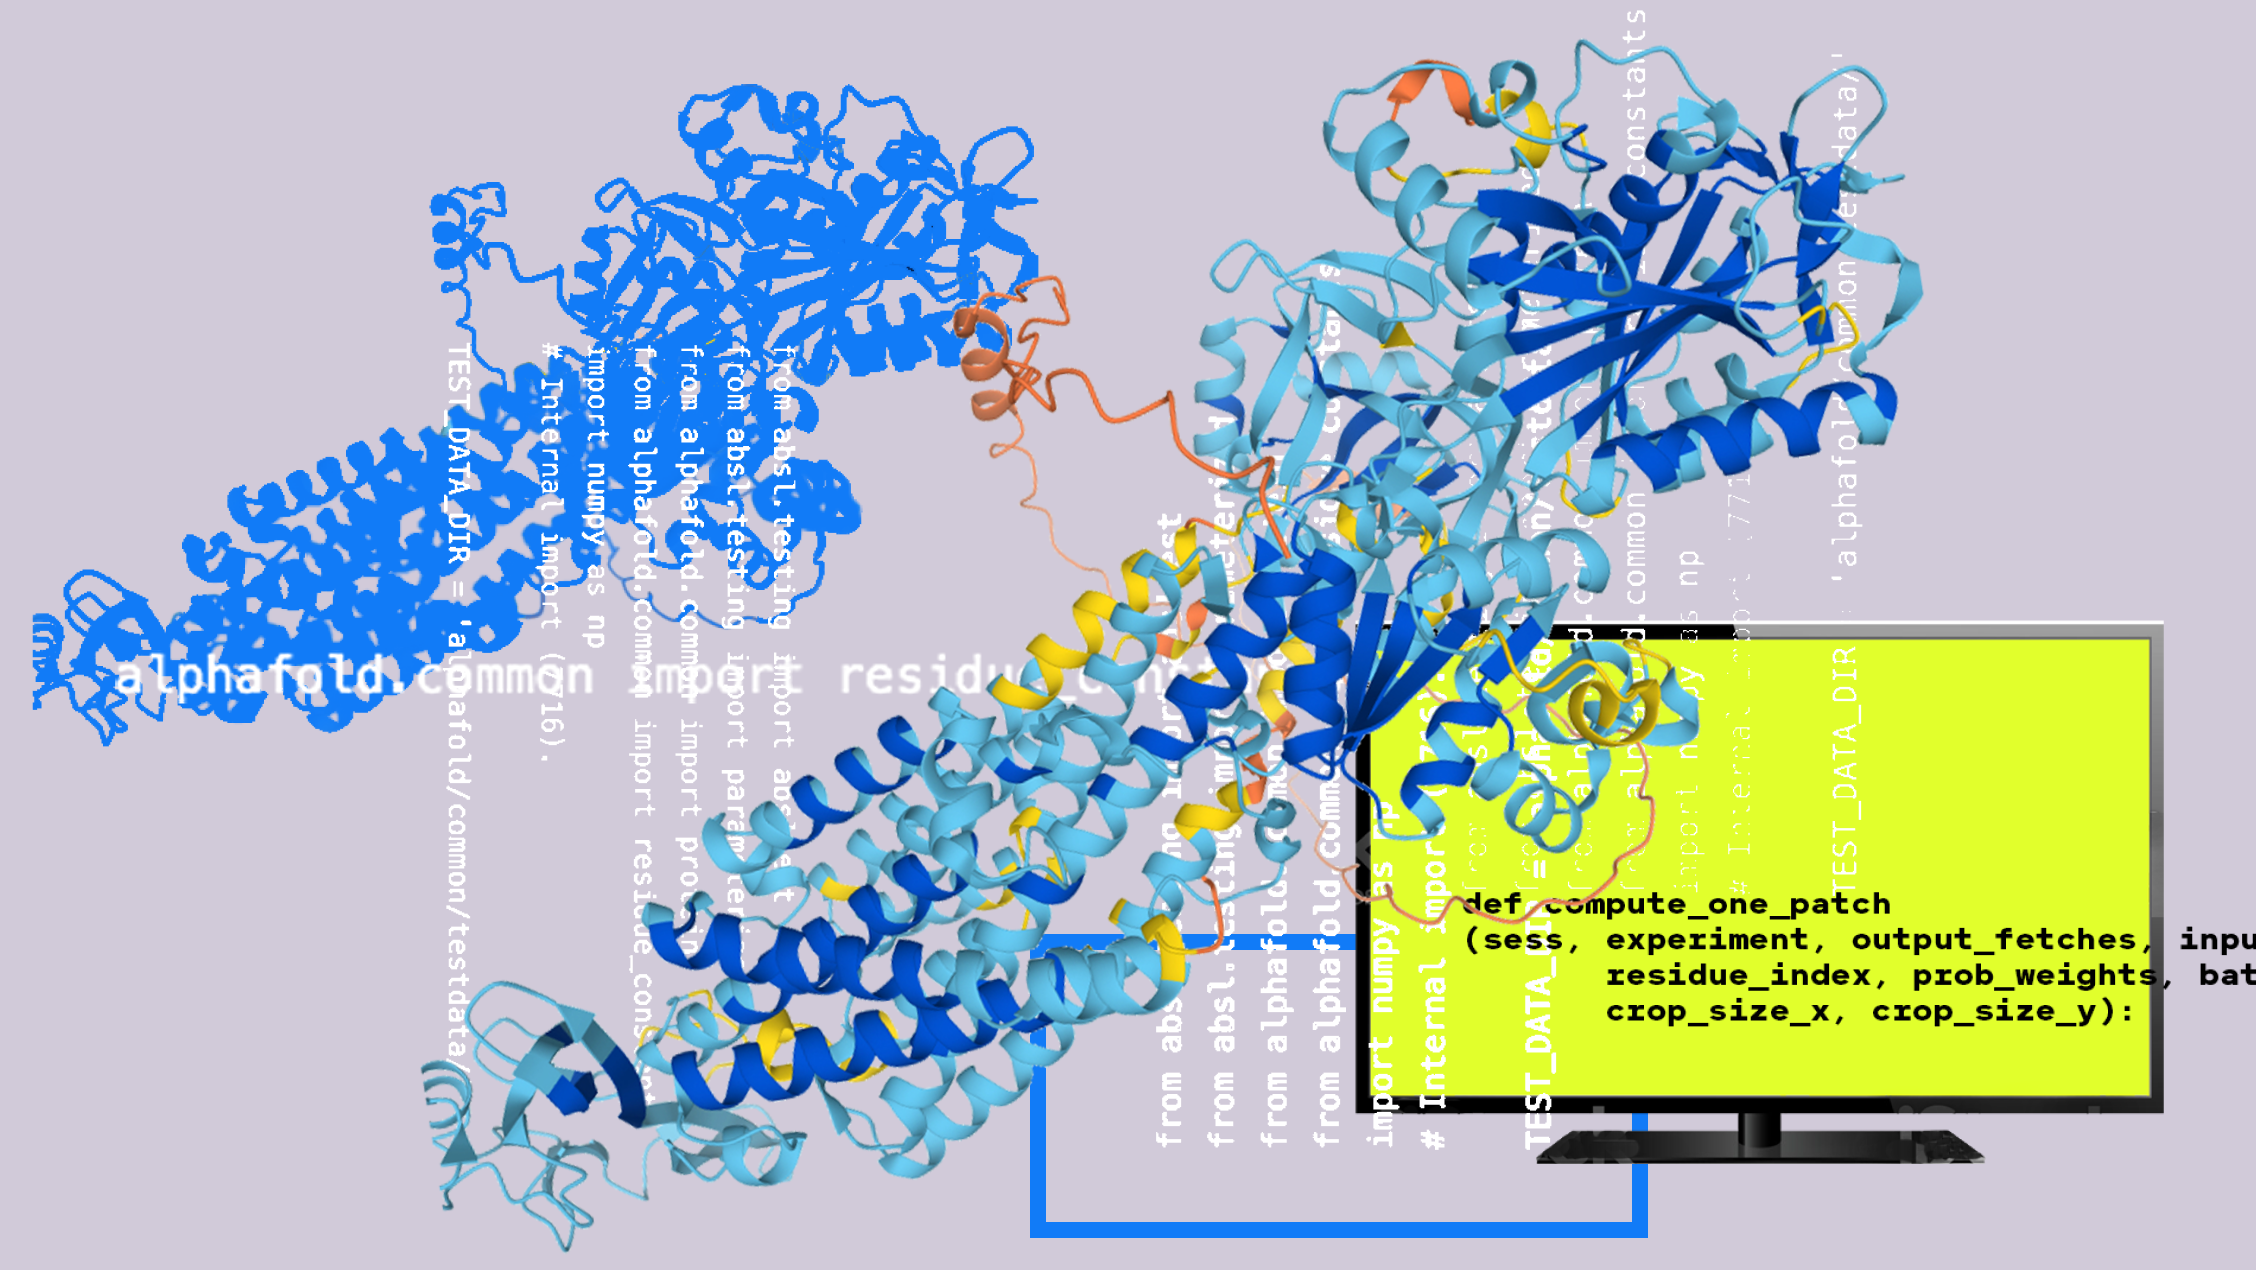 Concept illustration of using AI for predicting protein folding